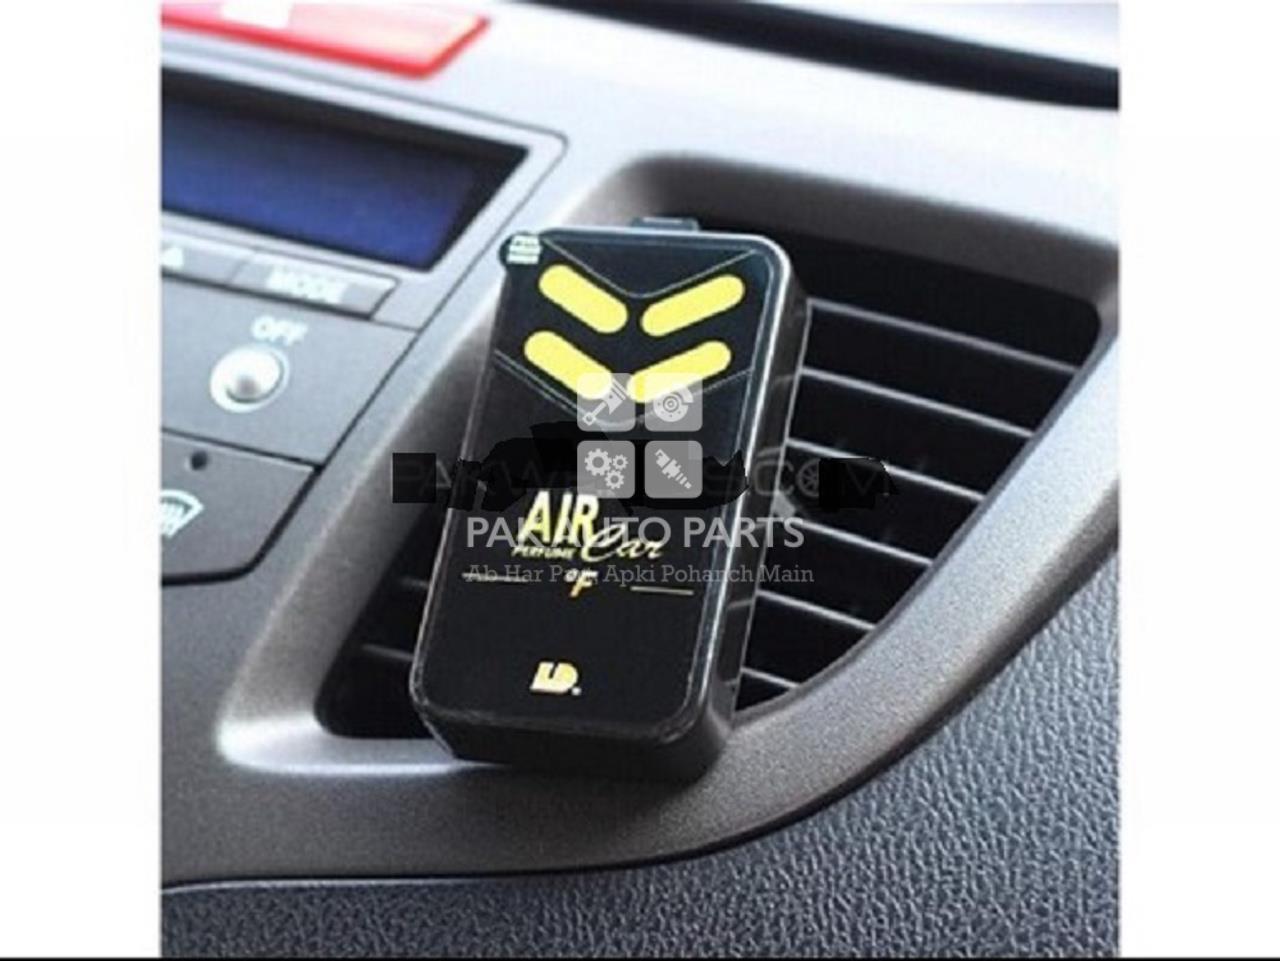 Picture of Car Ac Air Freshener | Unique fragrance | MADE IN SPAIN